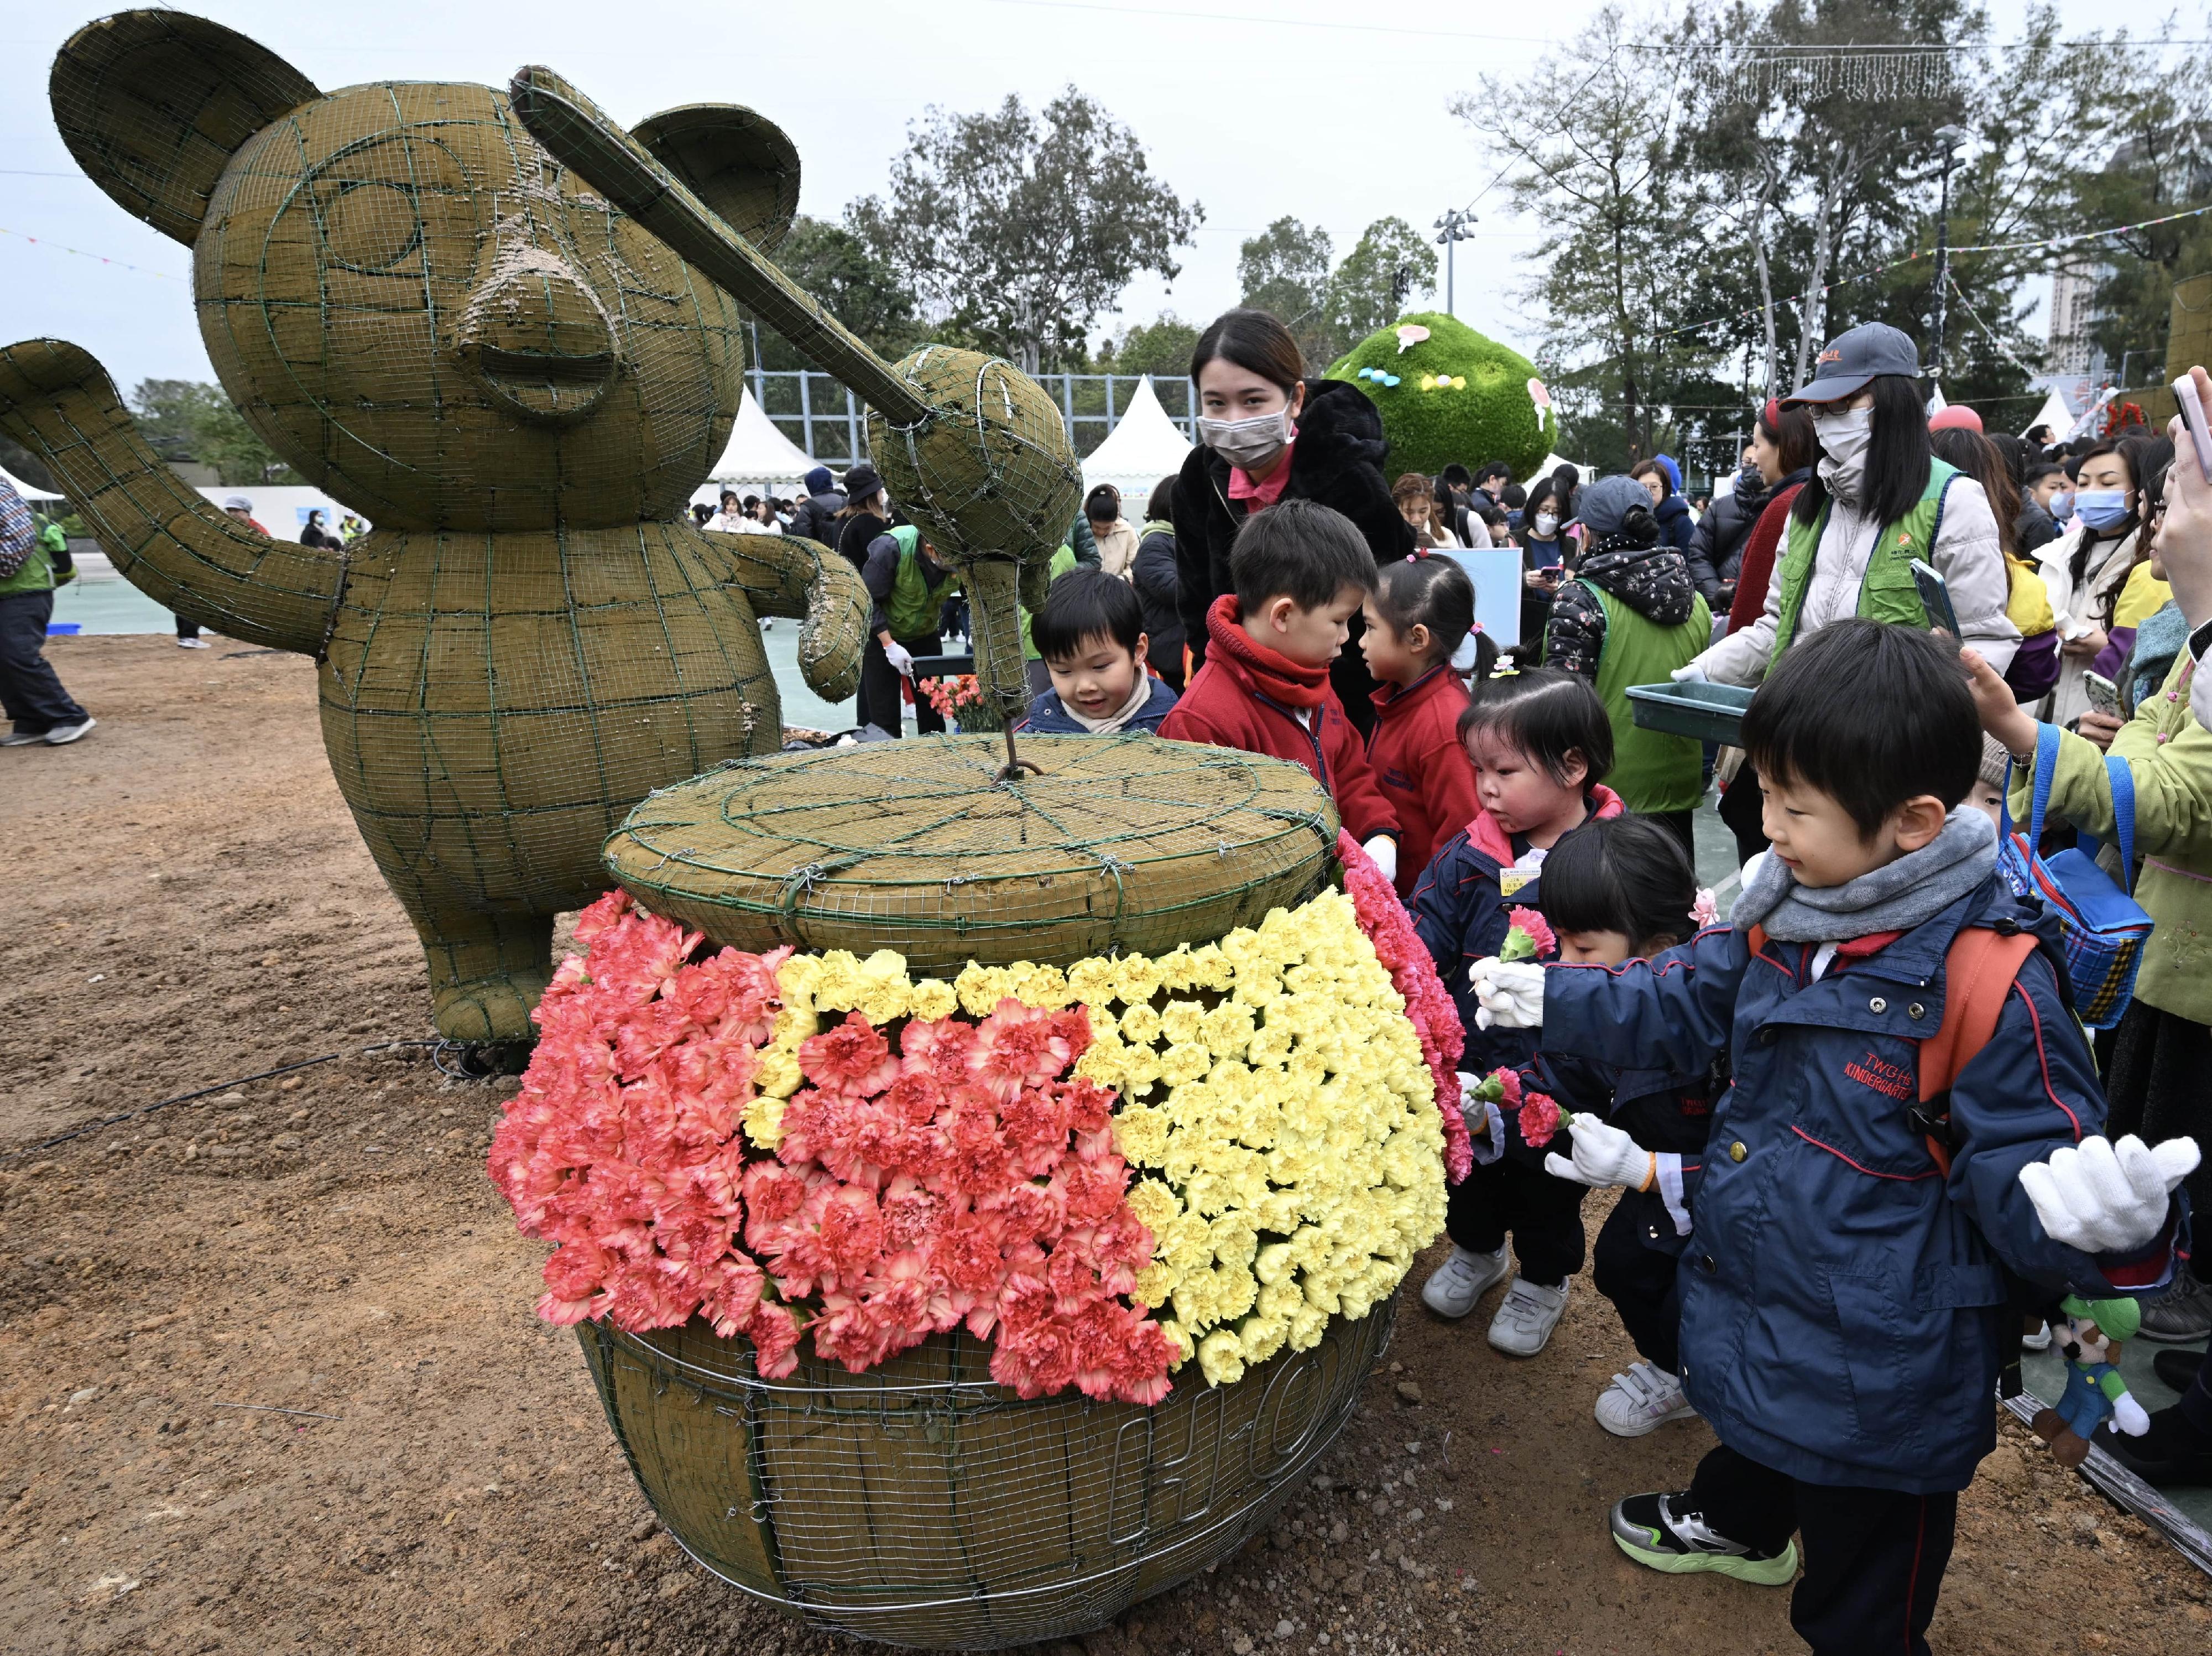 More than 1 100 students from 38 schools helped put on a spectacular horticultural display, "The Candy House", at Victoria Park today (March 2). Photo shows students in action.